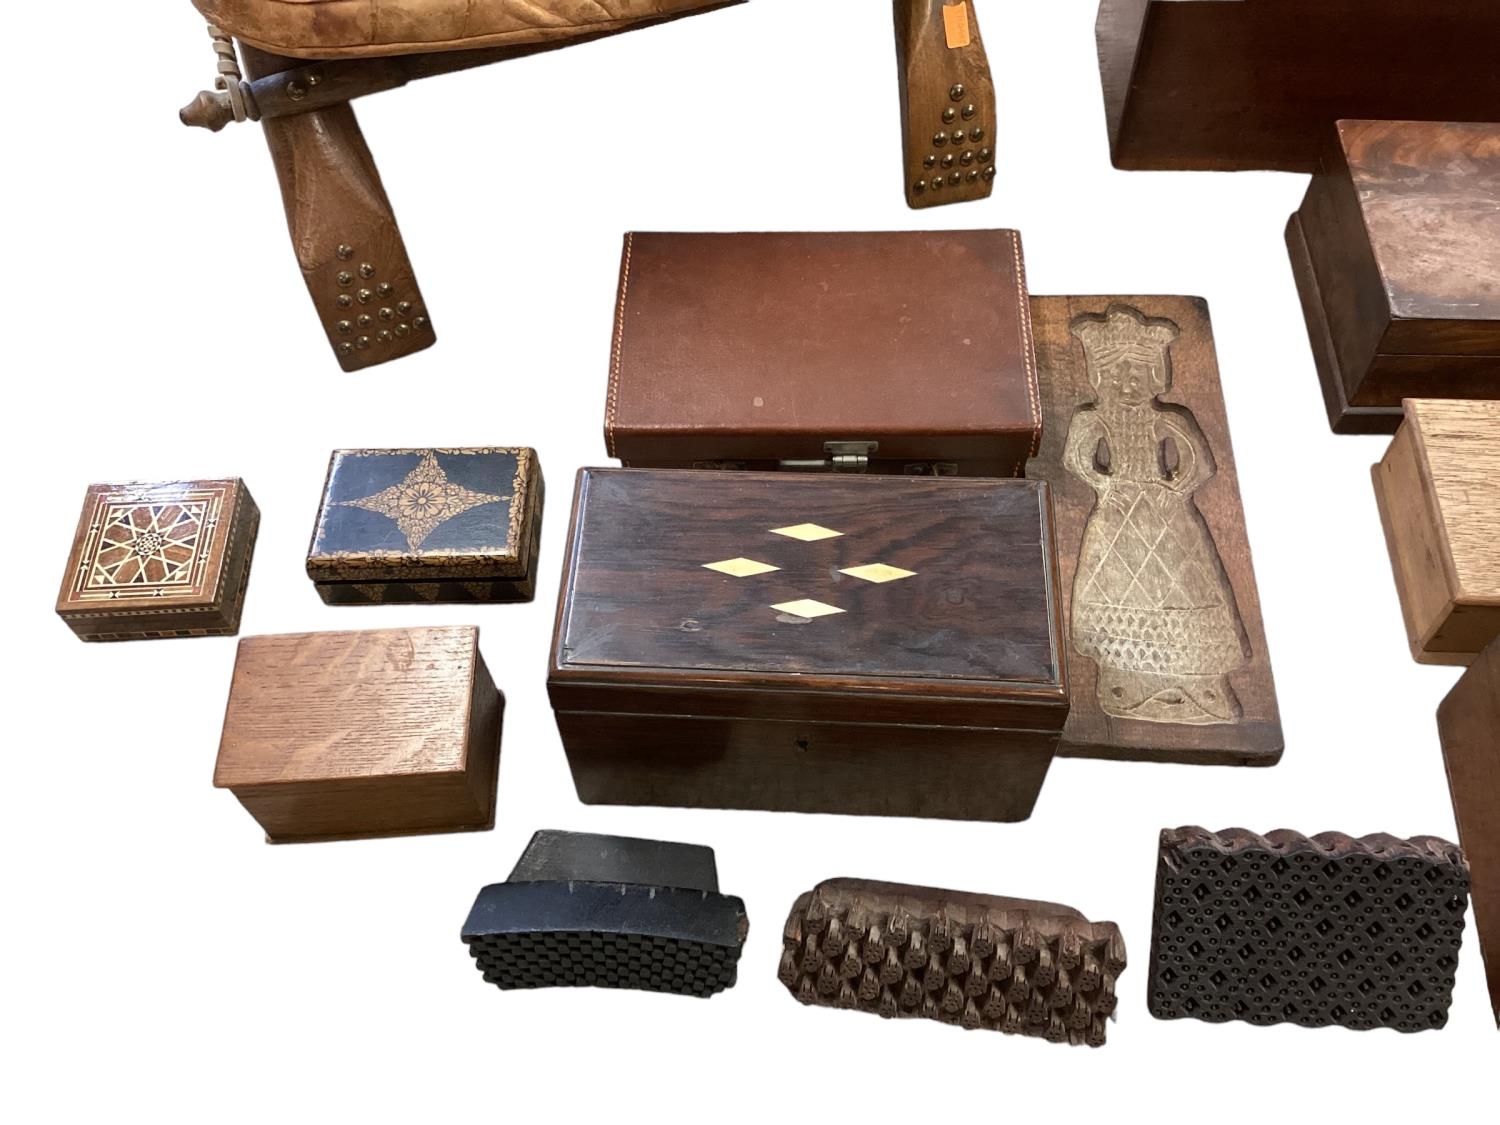 Collection of various wooden boxes, printing blocks, playing cards, and biscuit mould, camel - Image 5 of 7